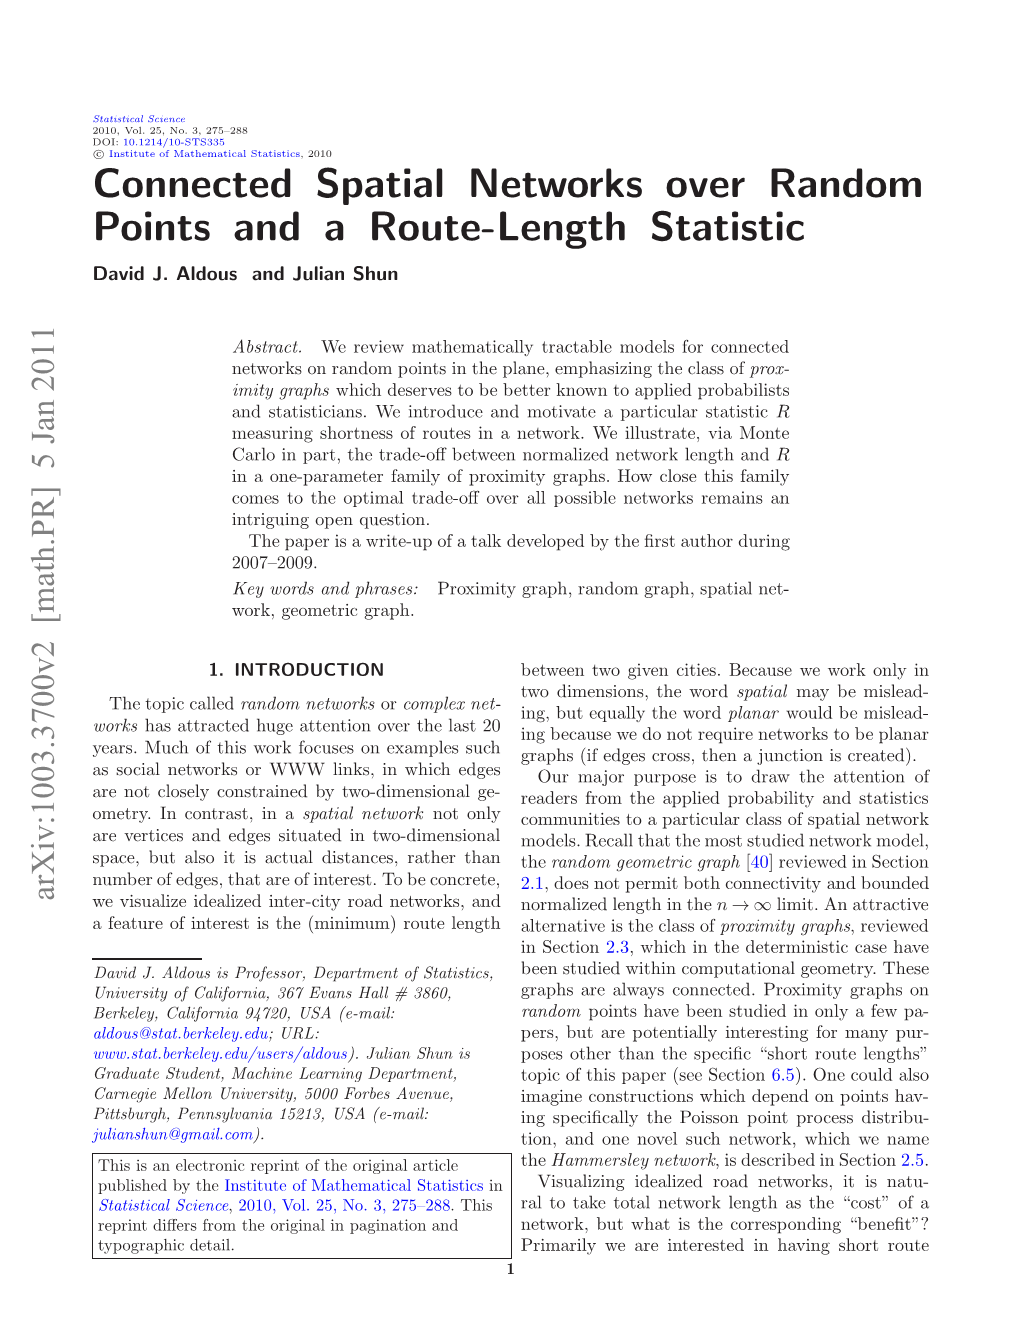 Connected Spatial Networks Over Random Points and a Route